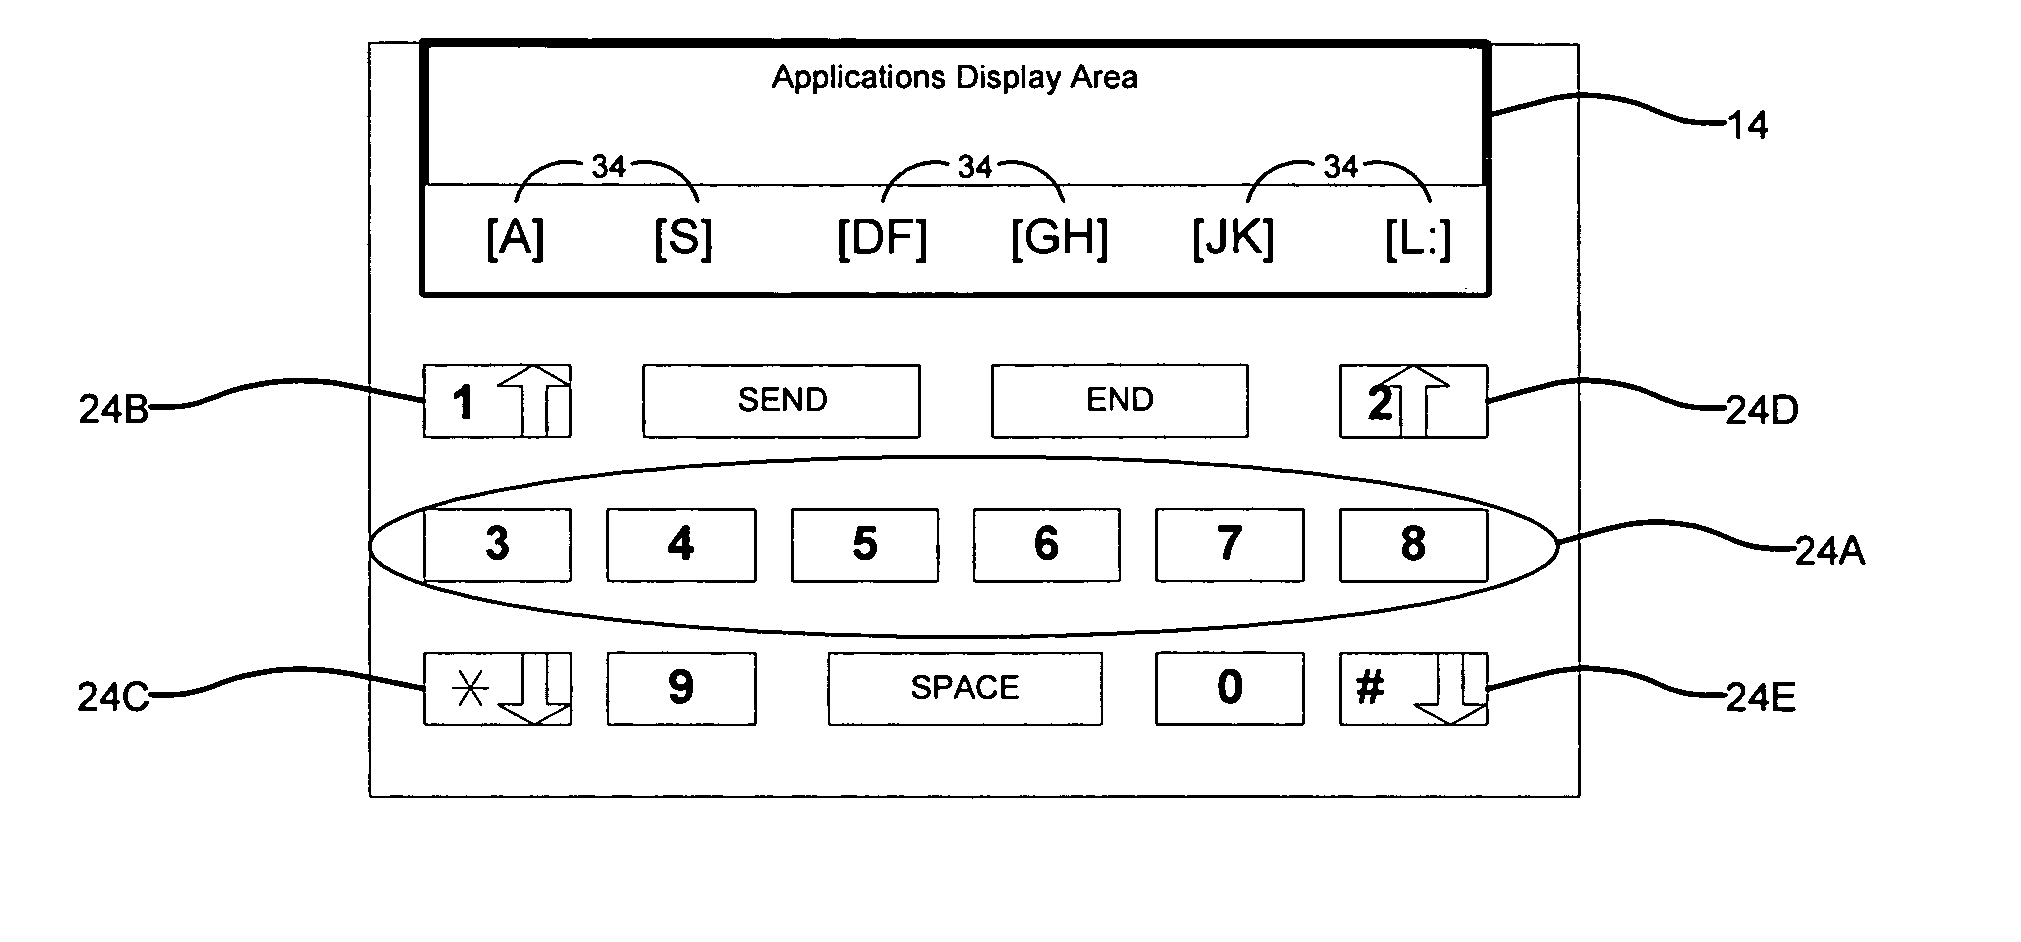 System and method for associating characters to keys in a keypad in an electronic device